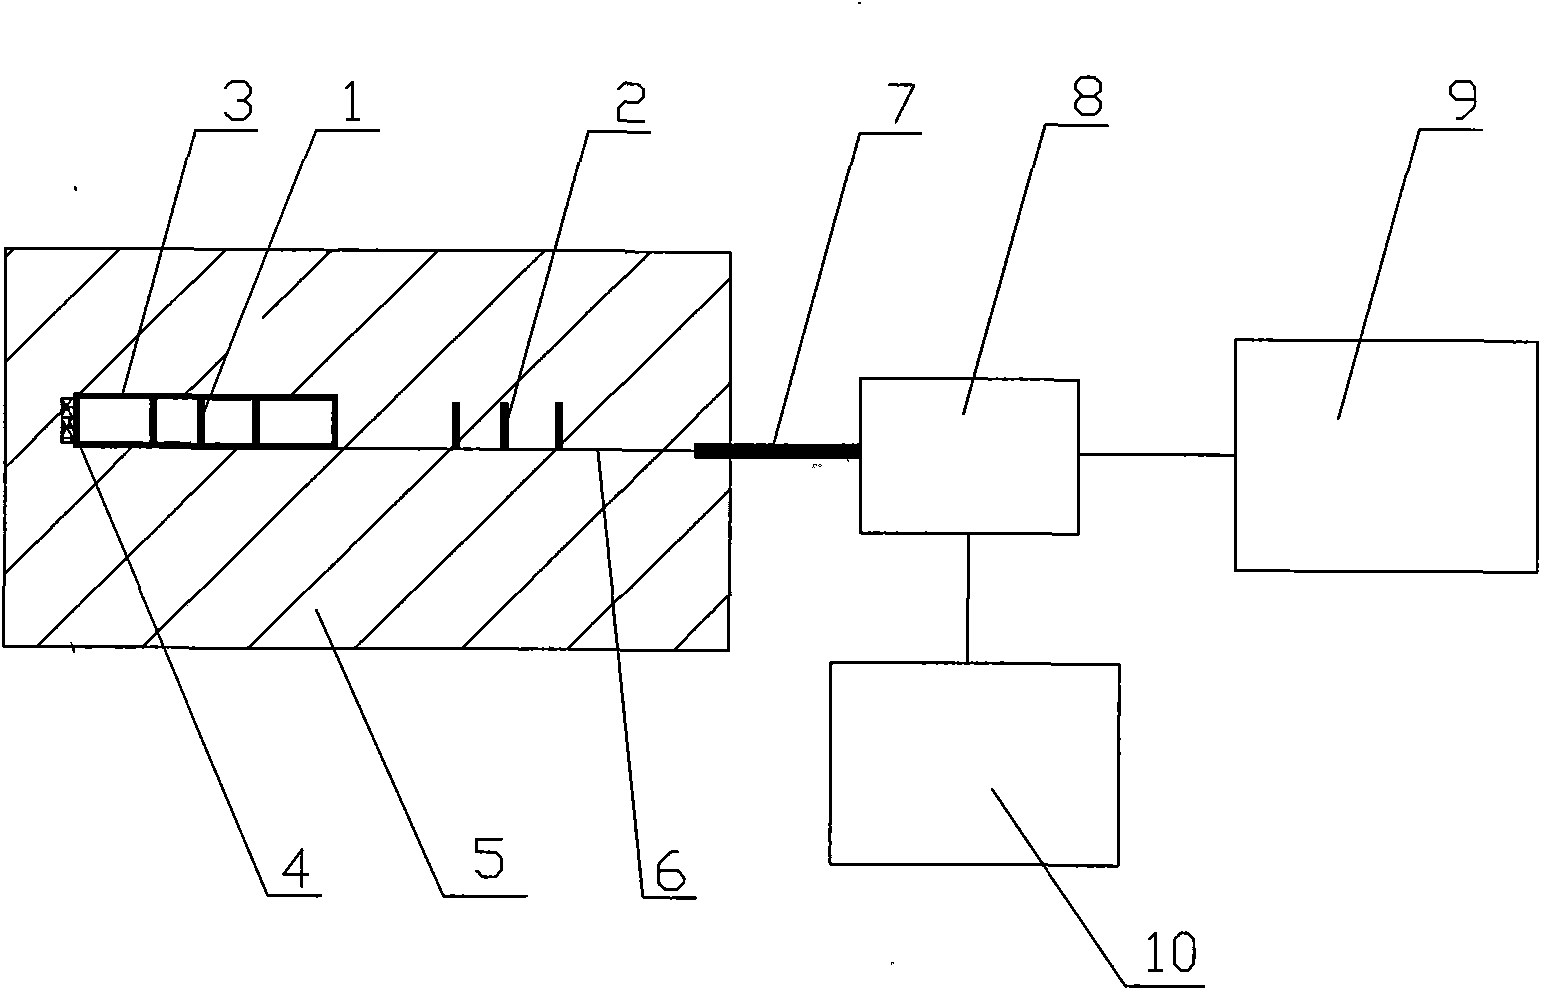 Fiber grating monitoring method for curing residual strain of composite materials